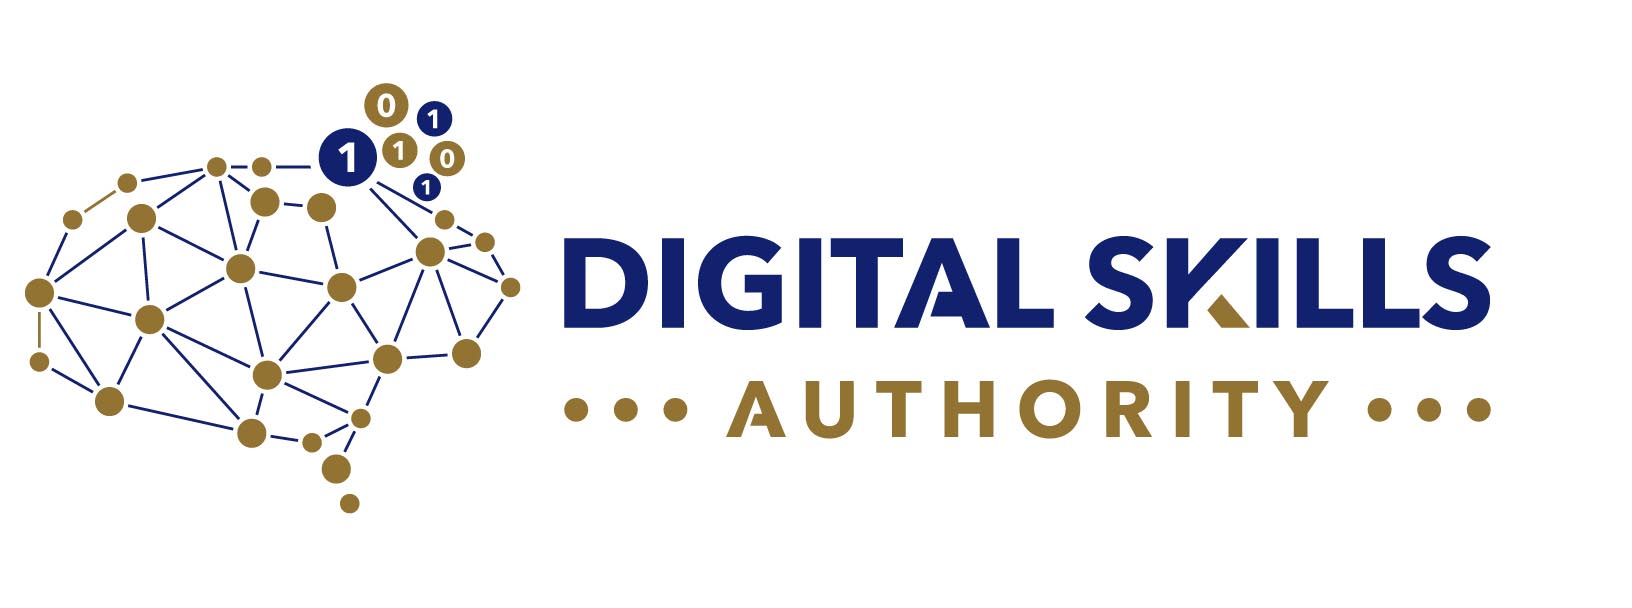 A Digital Skills Authority Qualification course